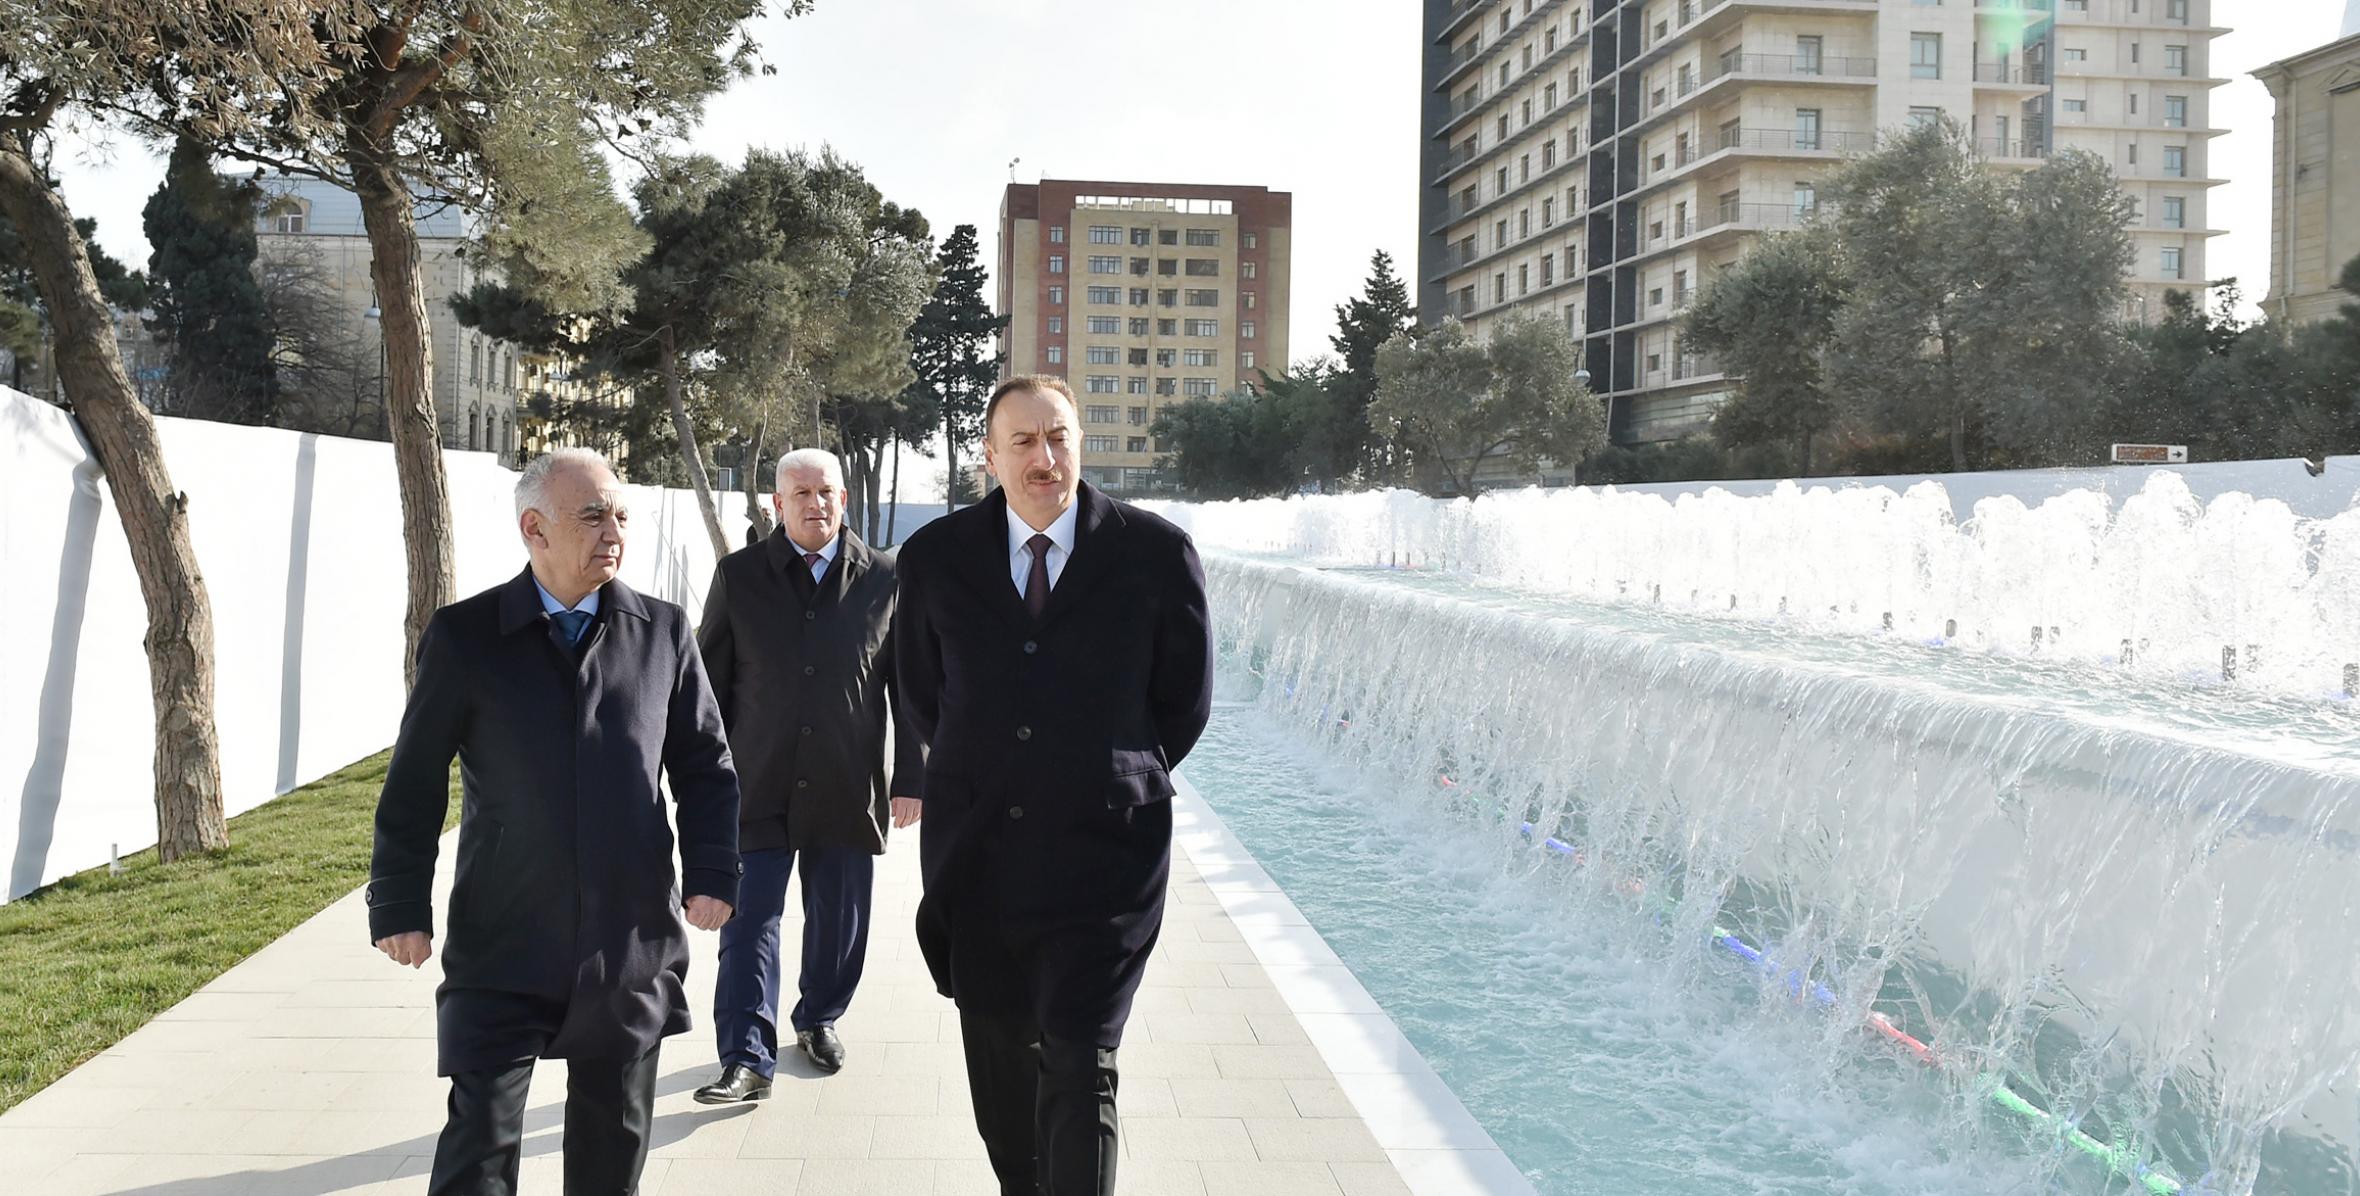 Ilham Aliyev reviewed the newly-built fountain and waterfall complex in Khatai district